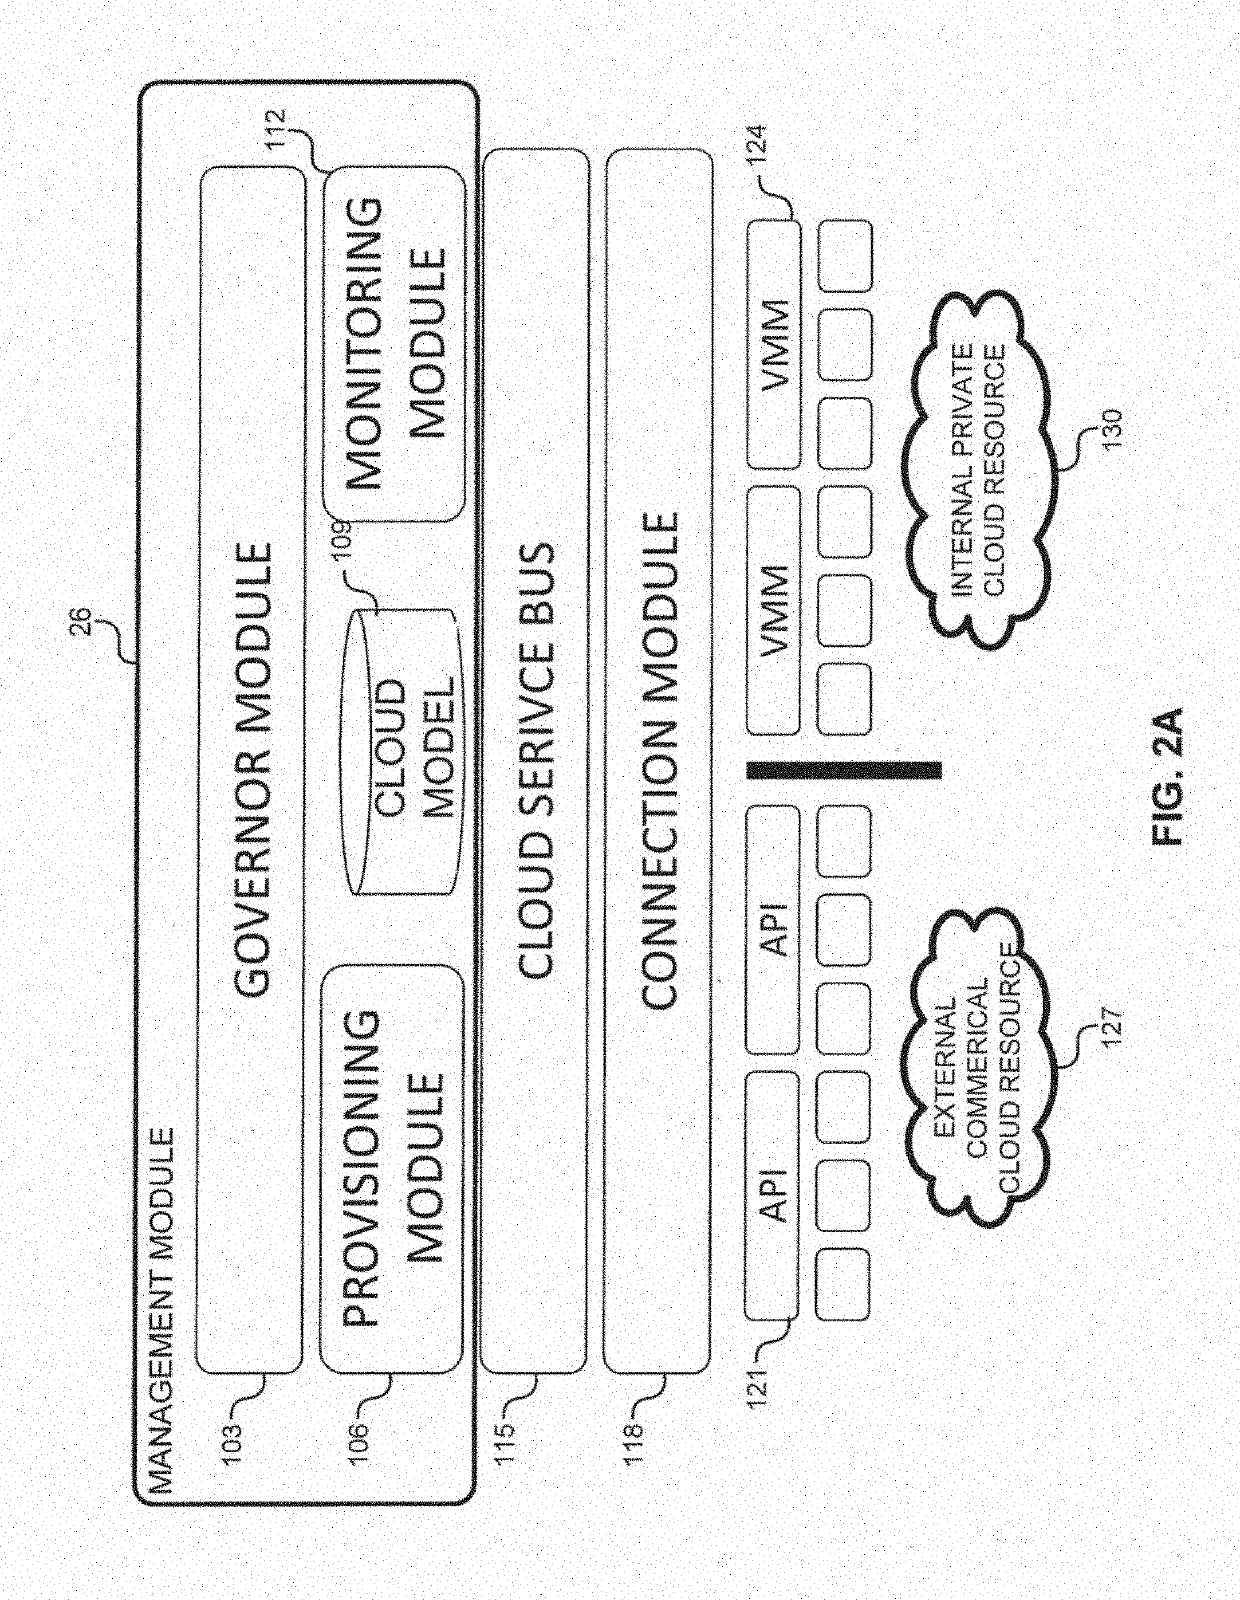 System and method for a cloud computing abstraction layer